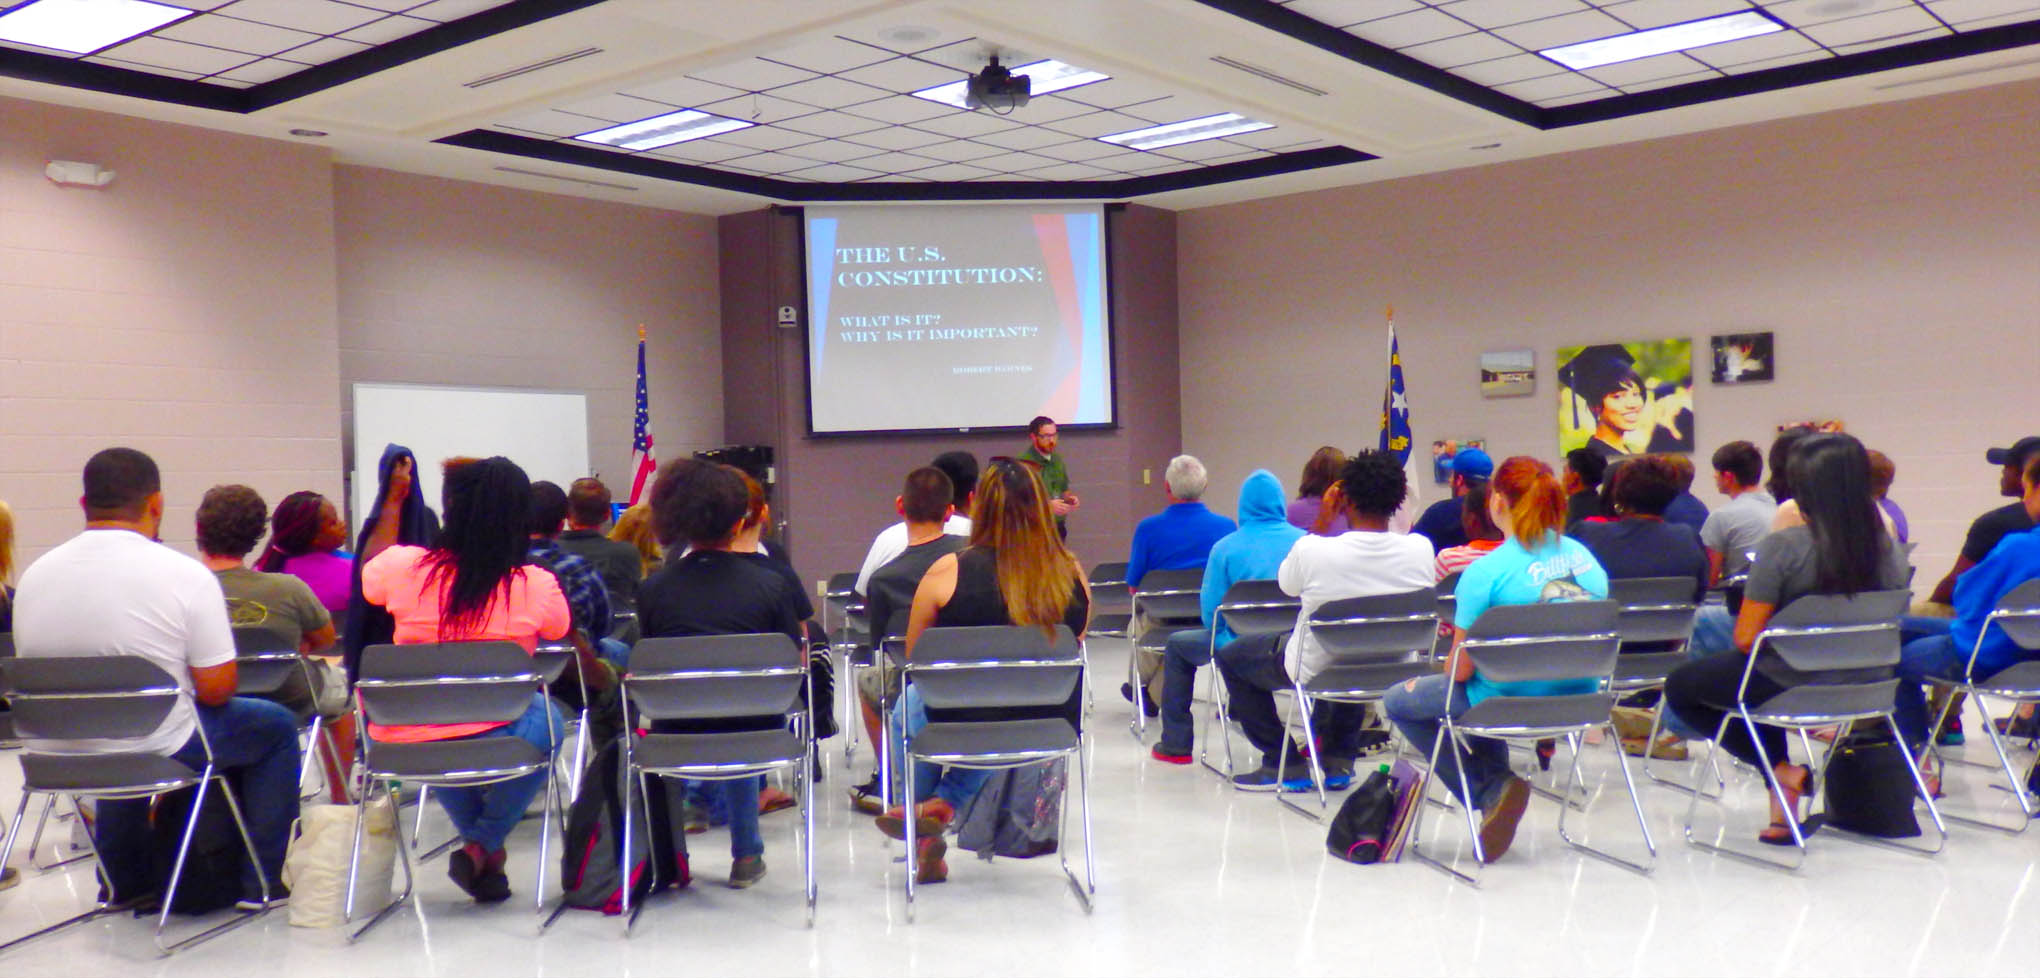 Click to enlarge,  The CCCC Harnett Main Campus recently hosted the lecture 'The U.S. Constitution: What Is It? Why Is It Important?' to commemorate Constitution Day. 